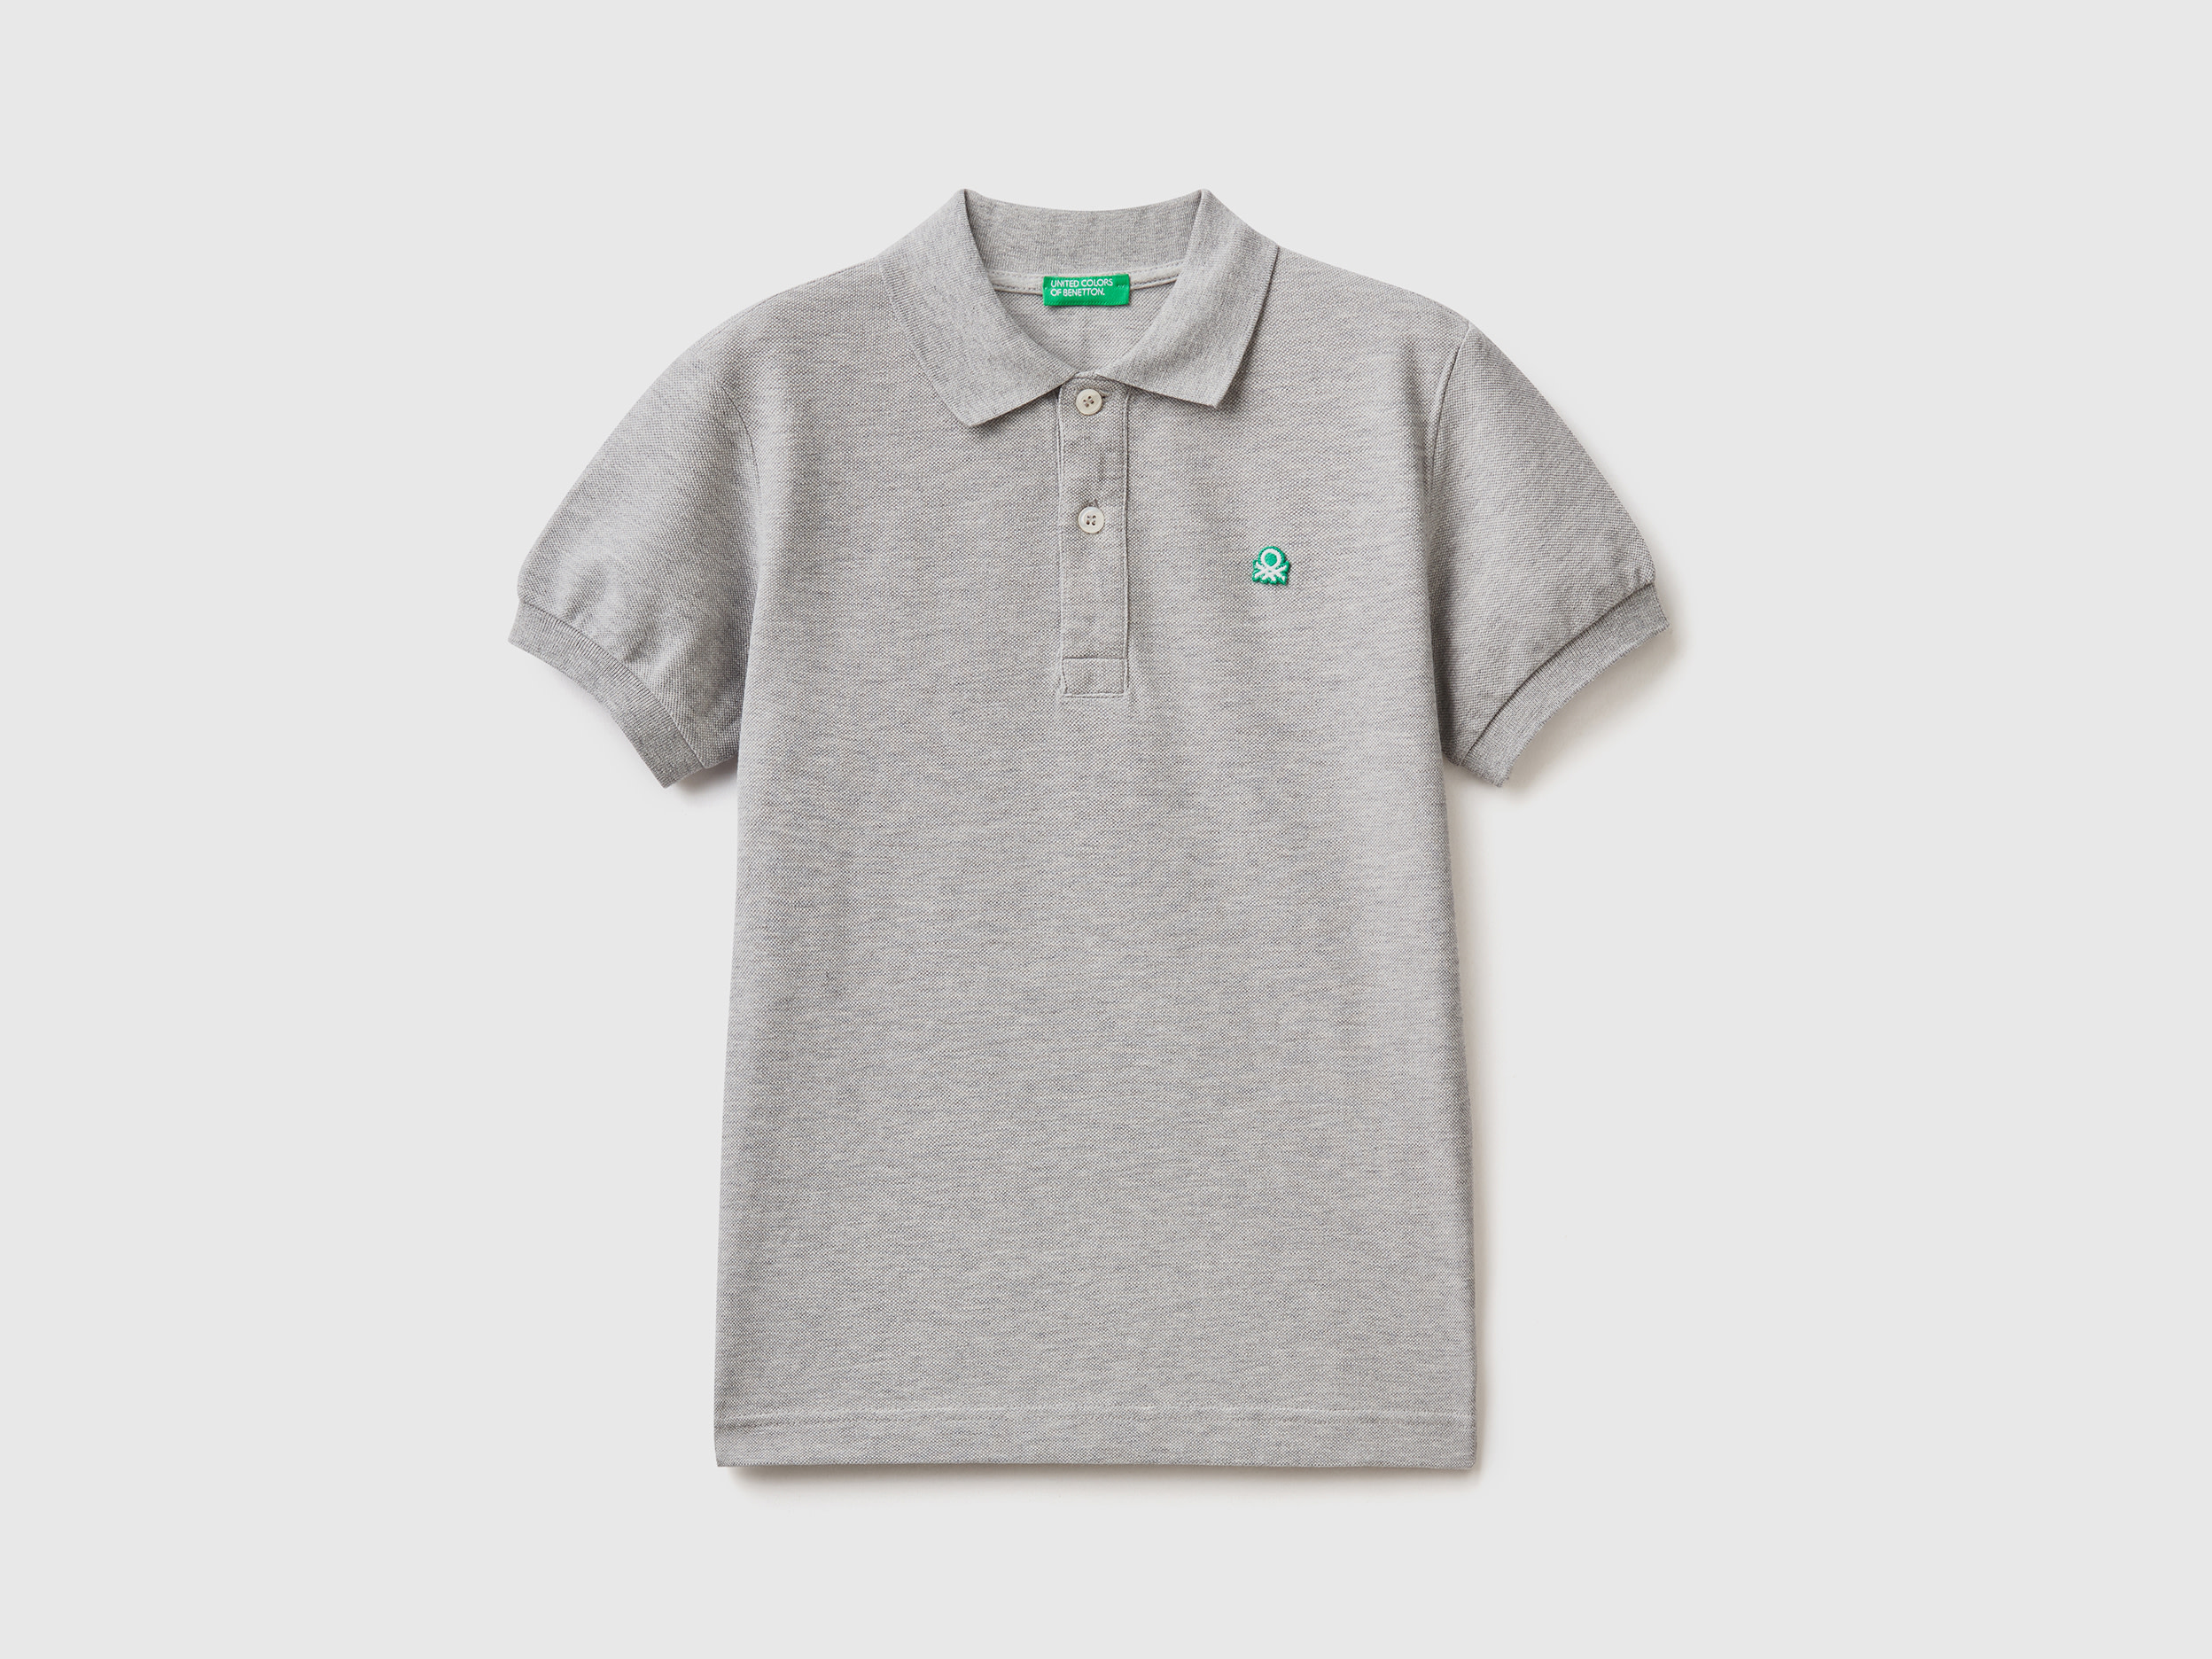 Image of Benetton, Slim Fit Polo In 100% Organic Cotton, size S, Light Gray, Kids